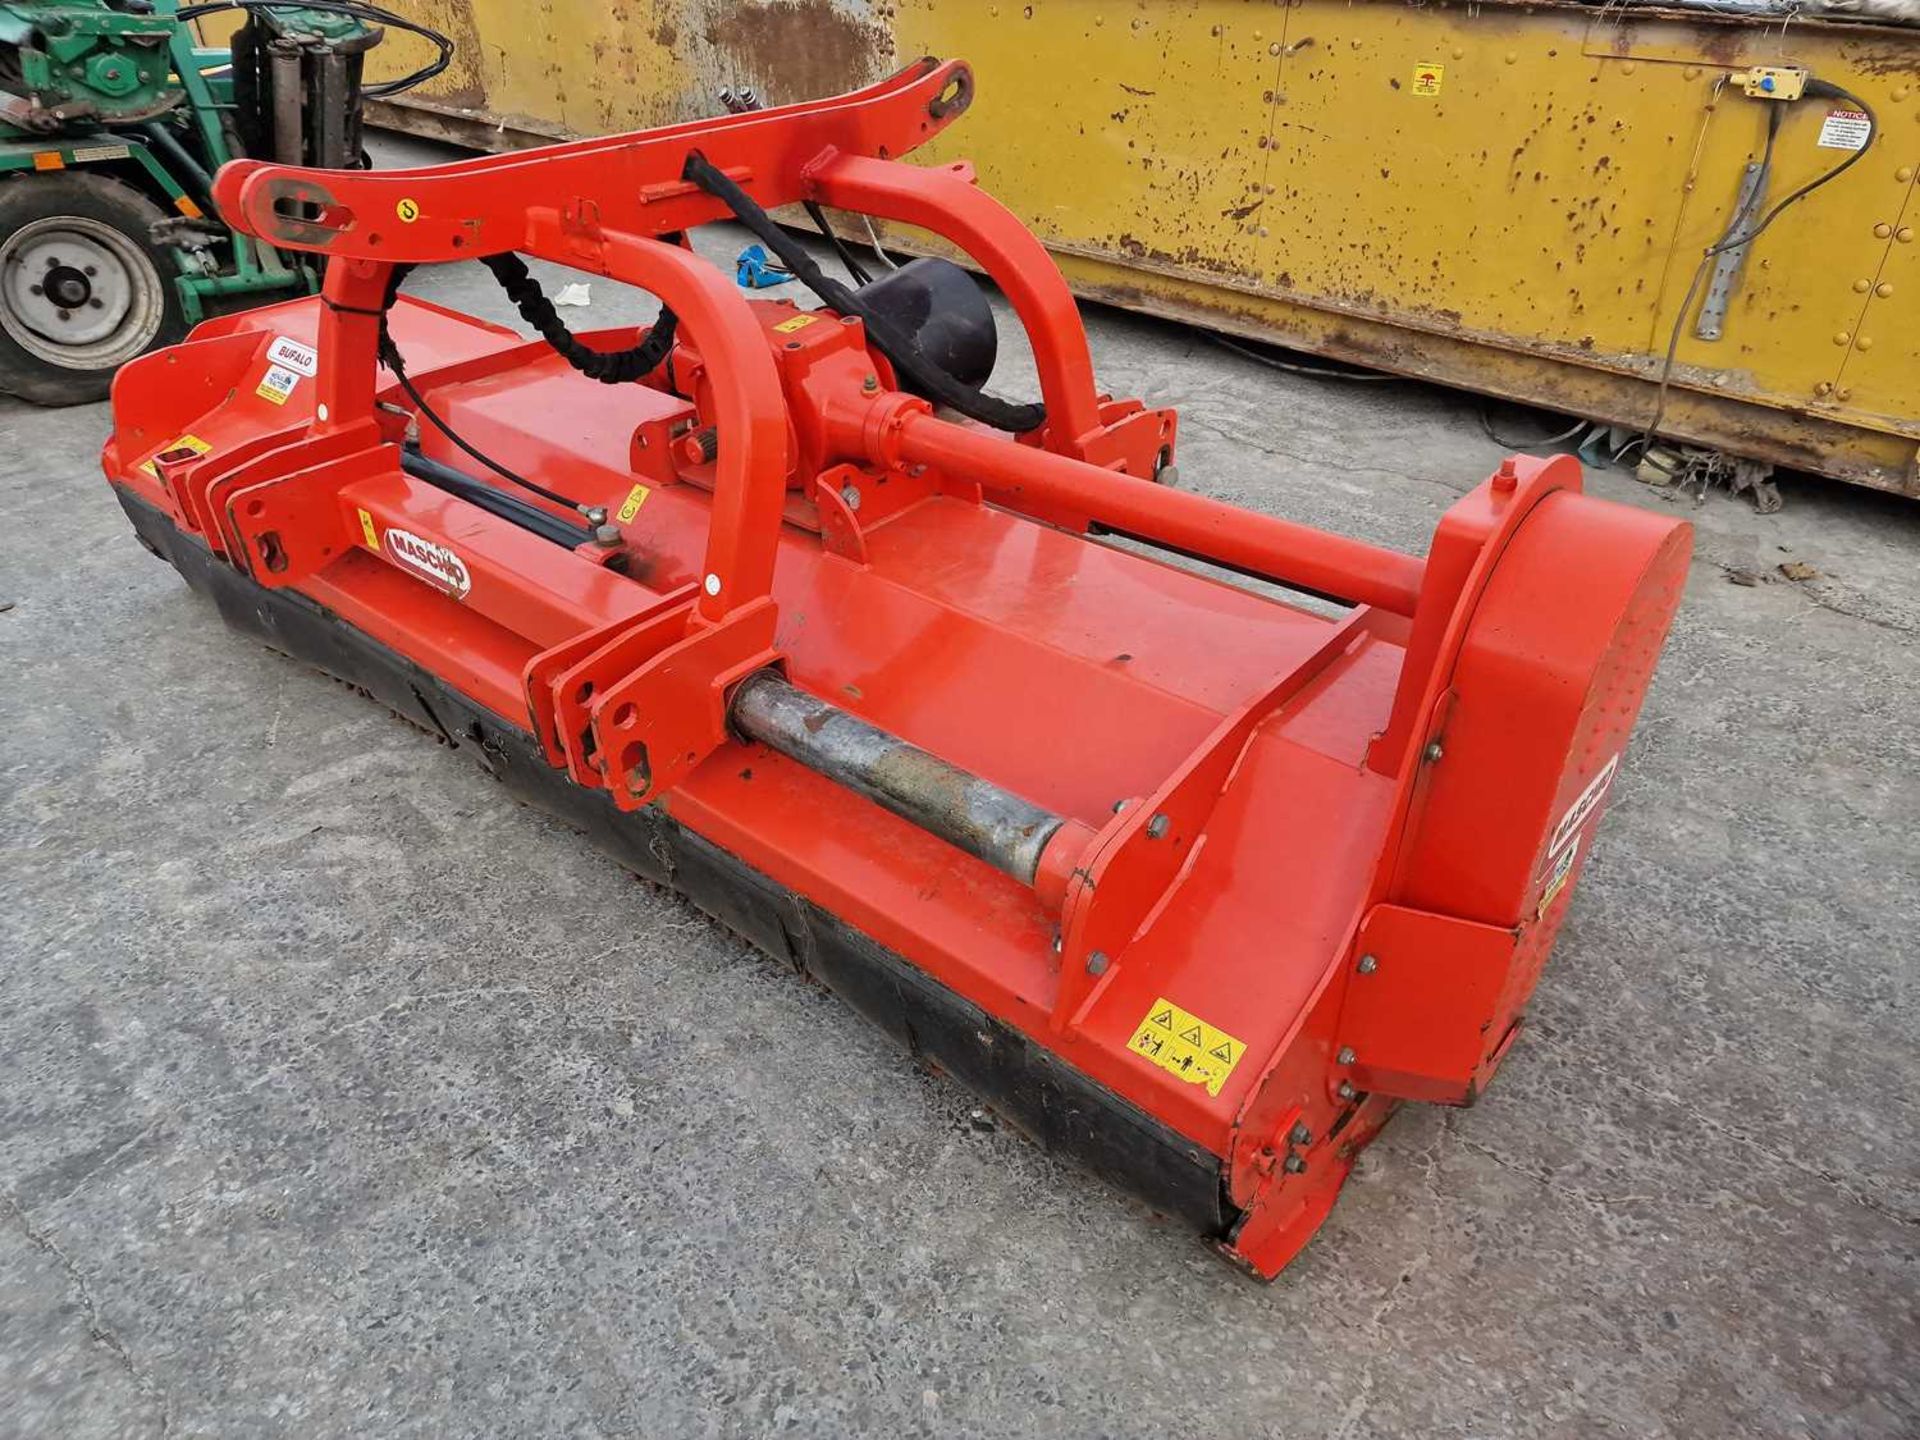 2018 Maschio Bufalo 280 PTO Driven Topper, Side Shift to suit 3 Point Linkage - Image 3 of 11